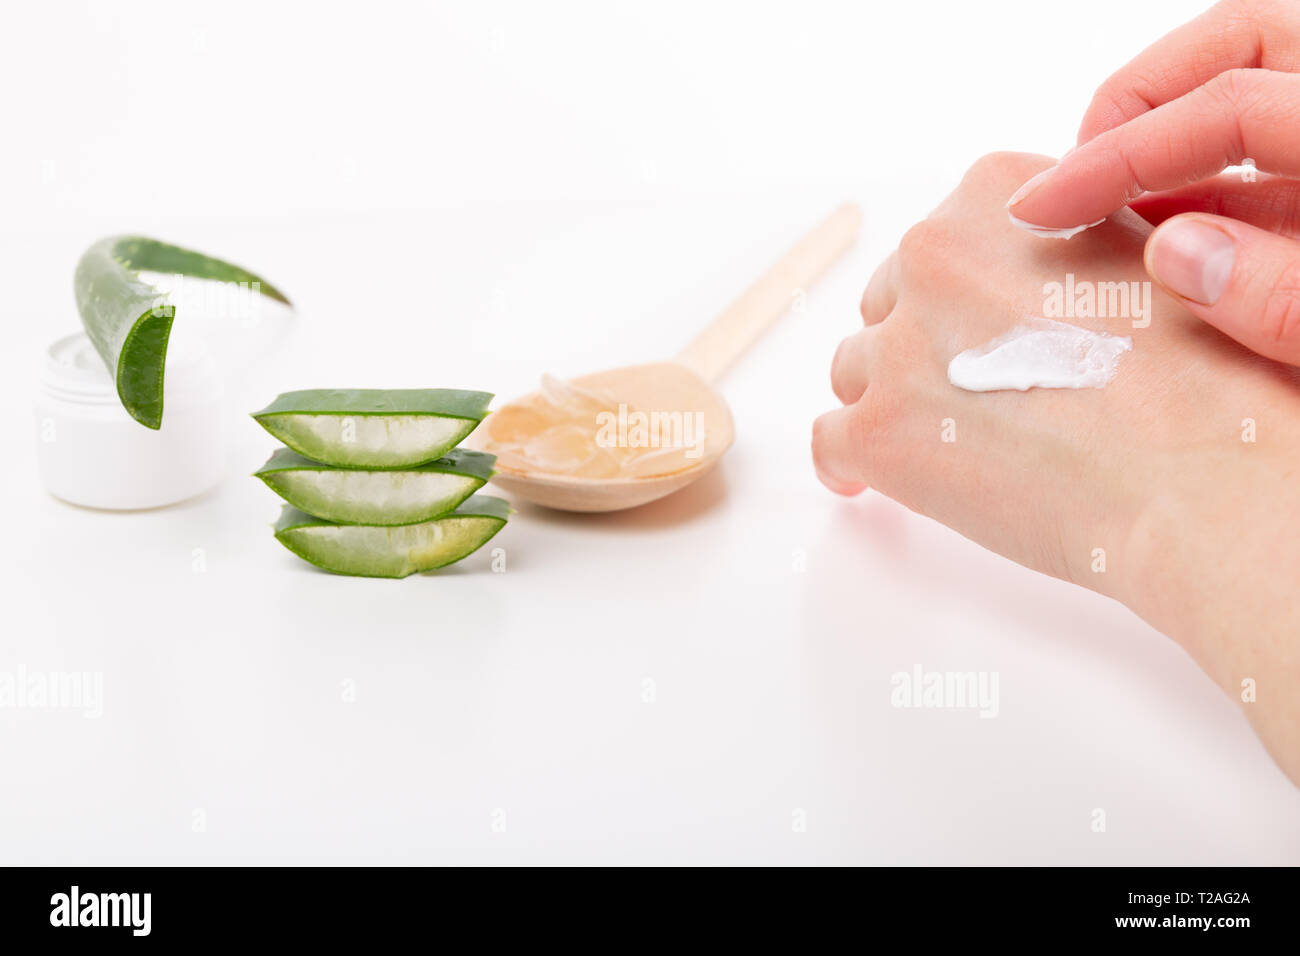 Opened plastic container with cream, aloe vera gel on woden spoon, sliced aloe vera plant and woman's hands on a white background Stock Photo